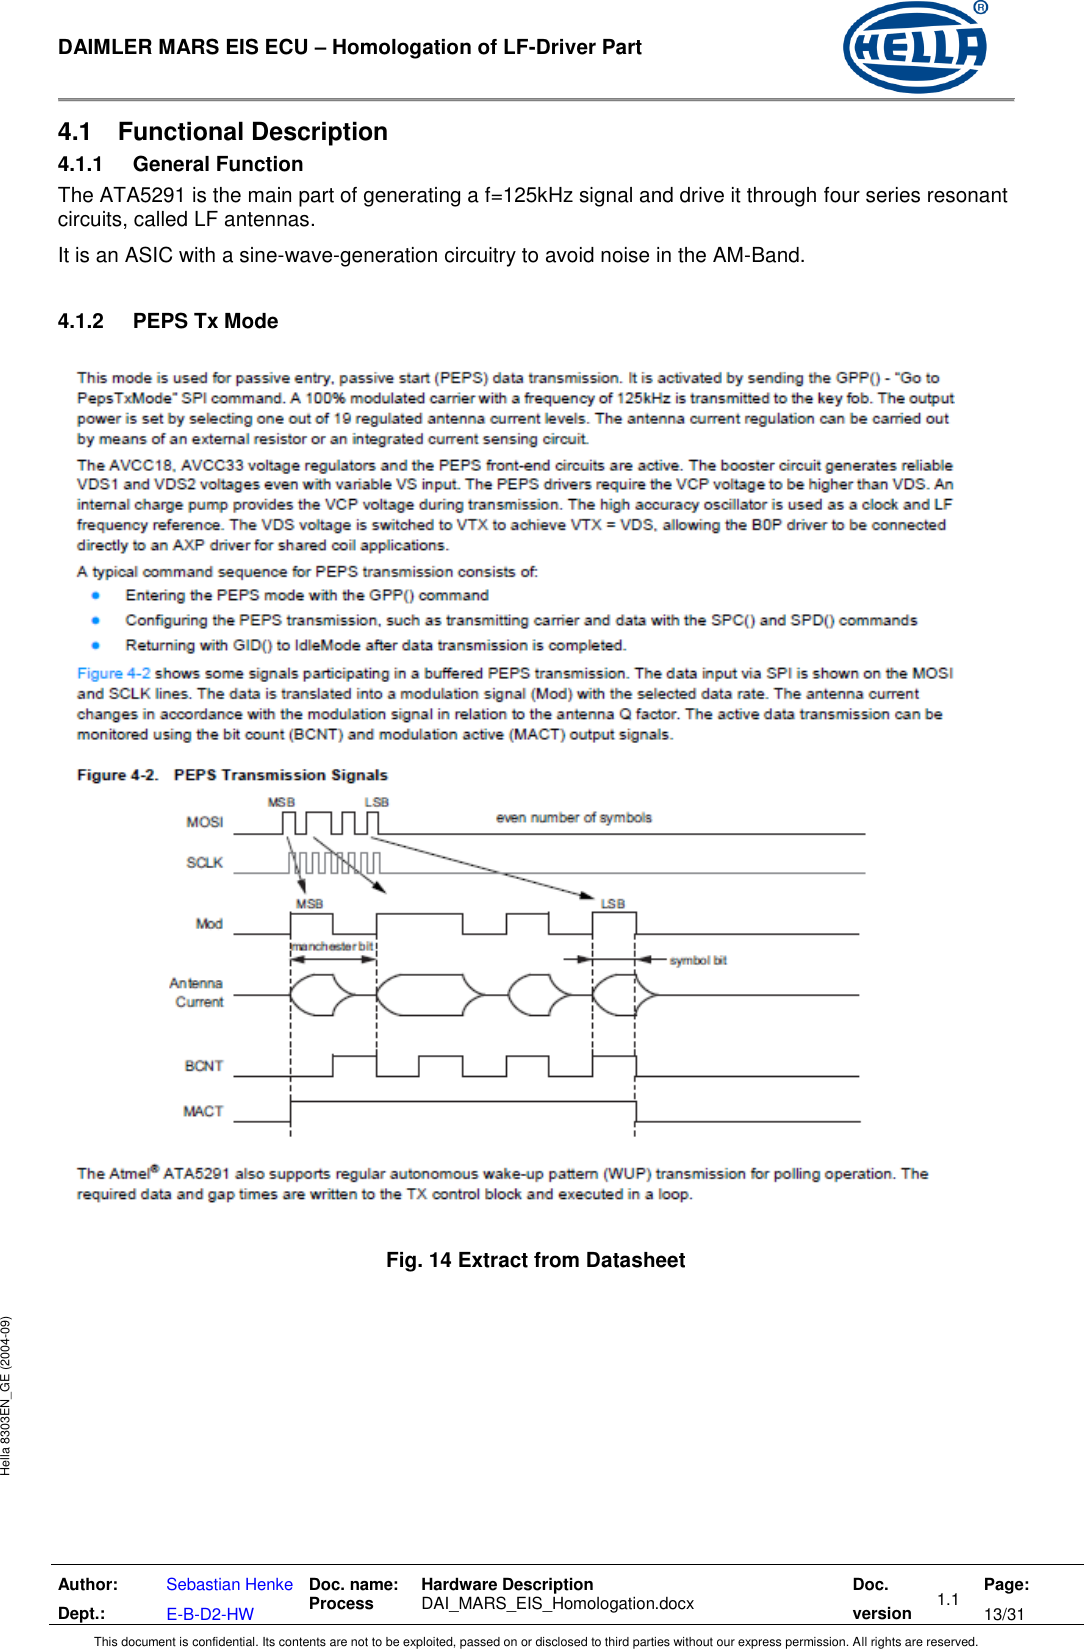  DAIMLER MARS EIS ECU – Homologation of LF-Driver Part   Author: Dept.: Sebastian Henke E-B-D2-HW Doc. name: Process Hardware Description  DAI_MARS_EIS_Homologation.docx Doc. version 1.1 Page: 13/31 This document is confidential. Its contents are not to be exploited, passed on or disclosed to third parties without our express permission. All rights are reserved. Hella 8303EN_GE (2004-09) 4.1  Functional Description 4.1.1  General Function The ATA5291 is the main part of generating a f=125kHz signal and drive it through four series resonant circuits, called LF antennas. It is an ASIC with a sine-wave-generation circuitry to avoid noise in the AM-Band.  4.1.2  PEPS Tx Mode    Fig. 14 Extract from Datasheet   